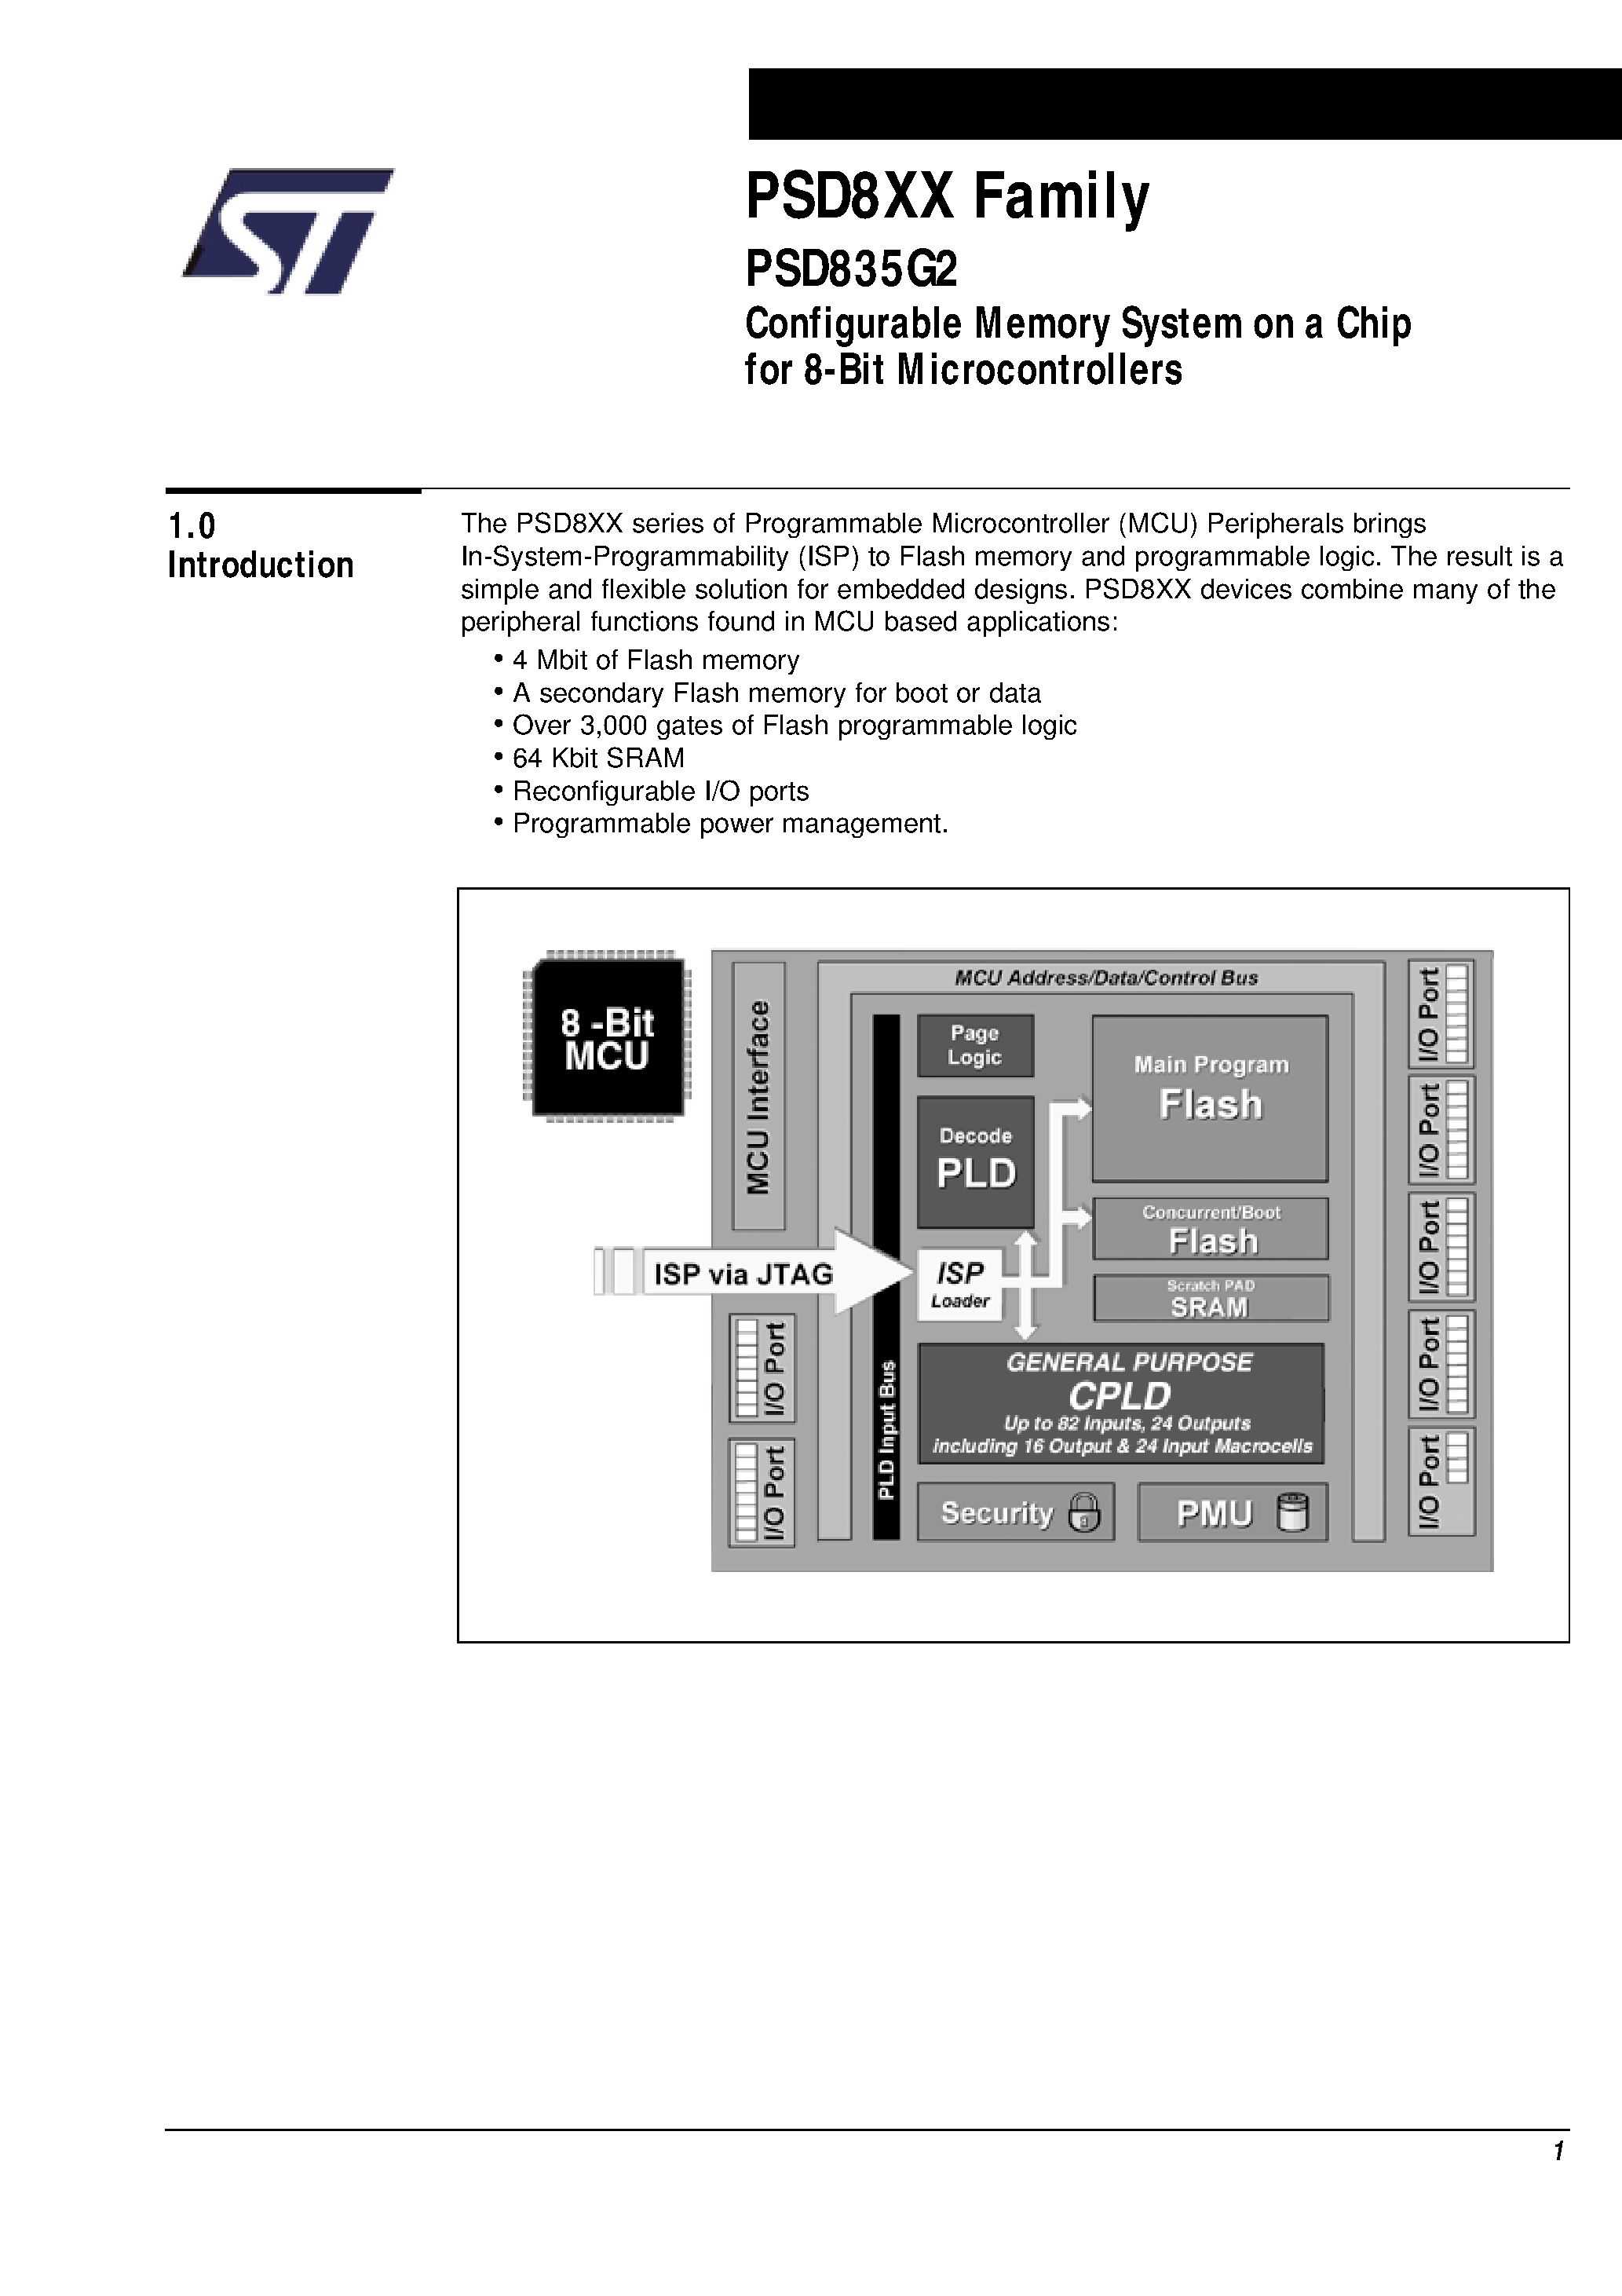 Datasheet PSD835F2V-A-12JI - Configurable Memory System on a Chip for 8-Bit Microcontrollers page 2